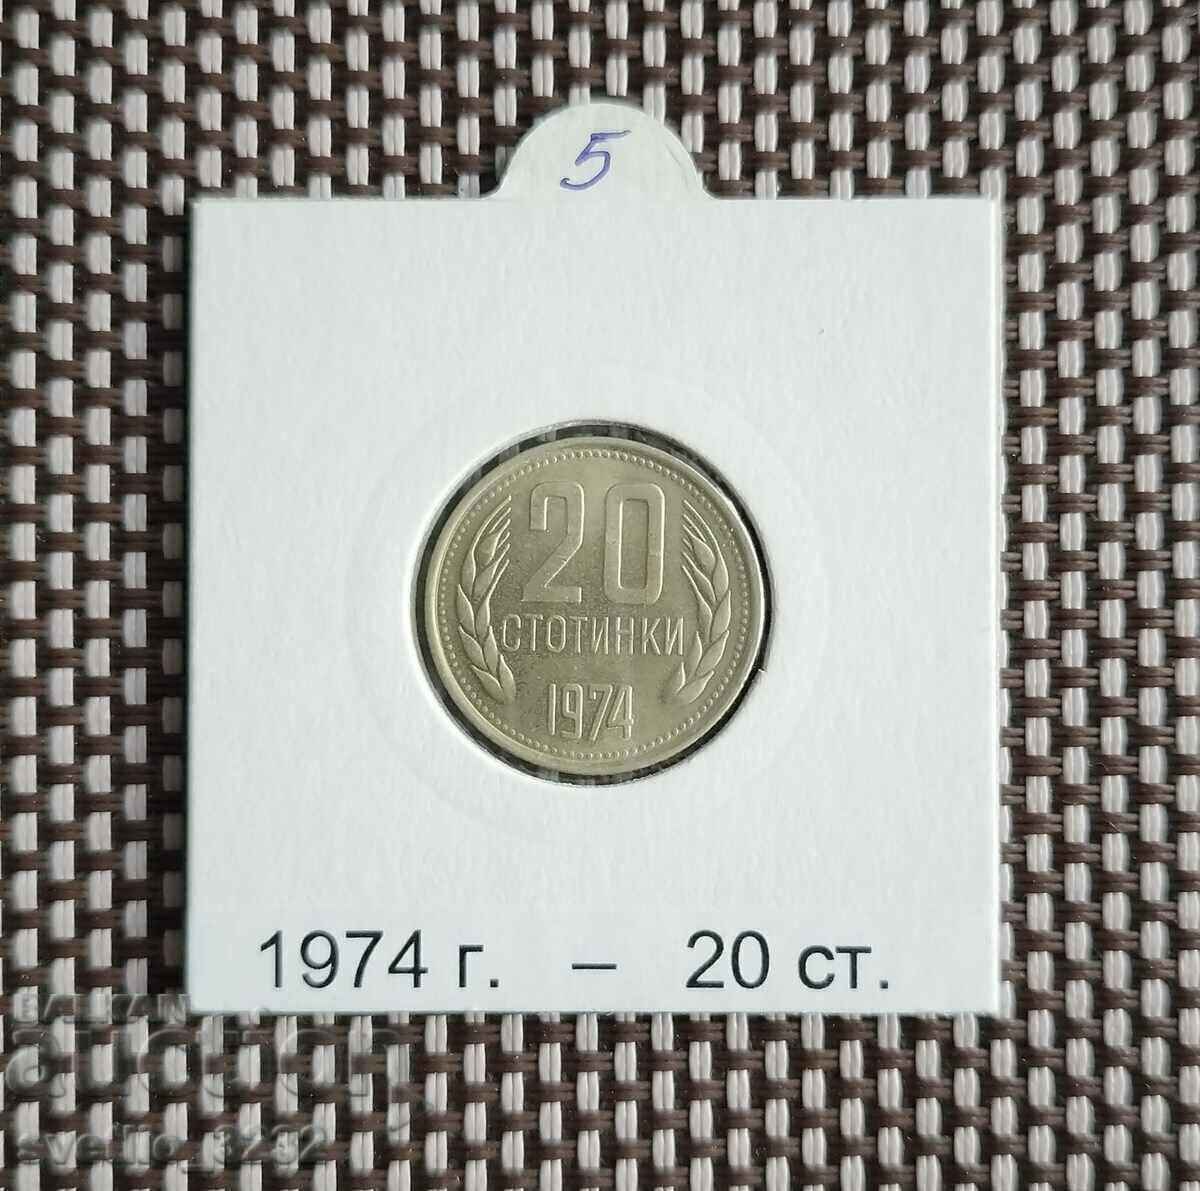 20 cents 1974